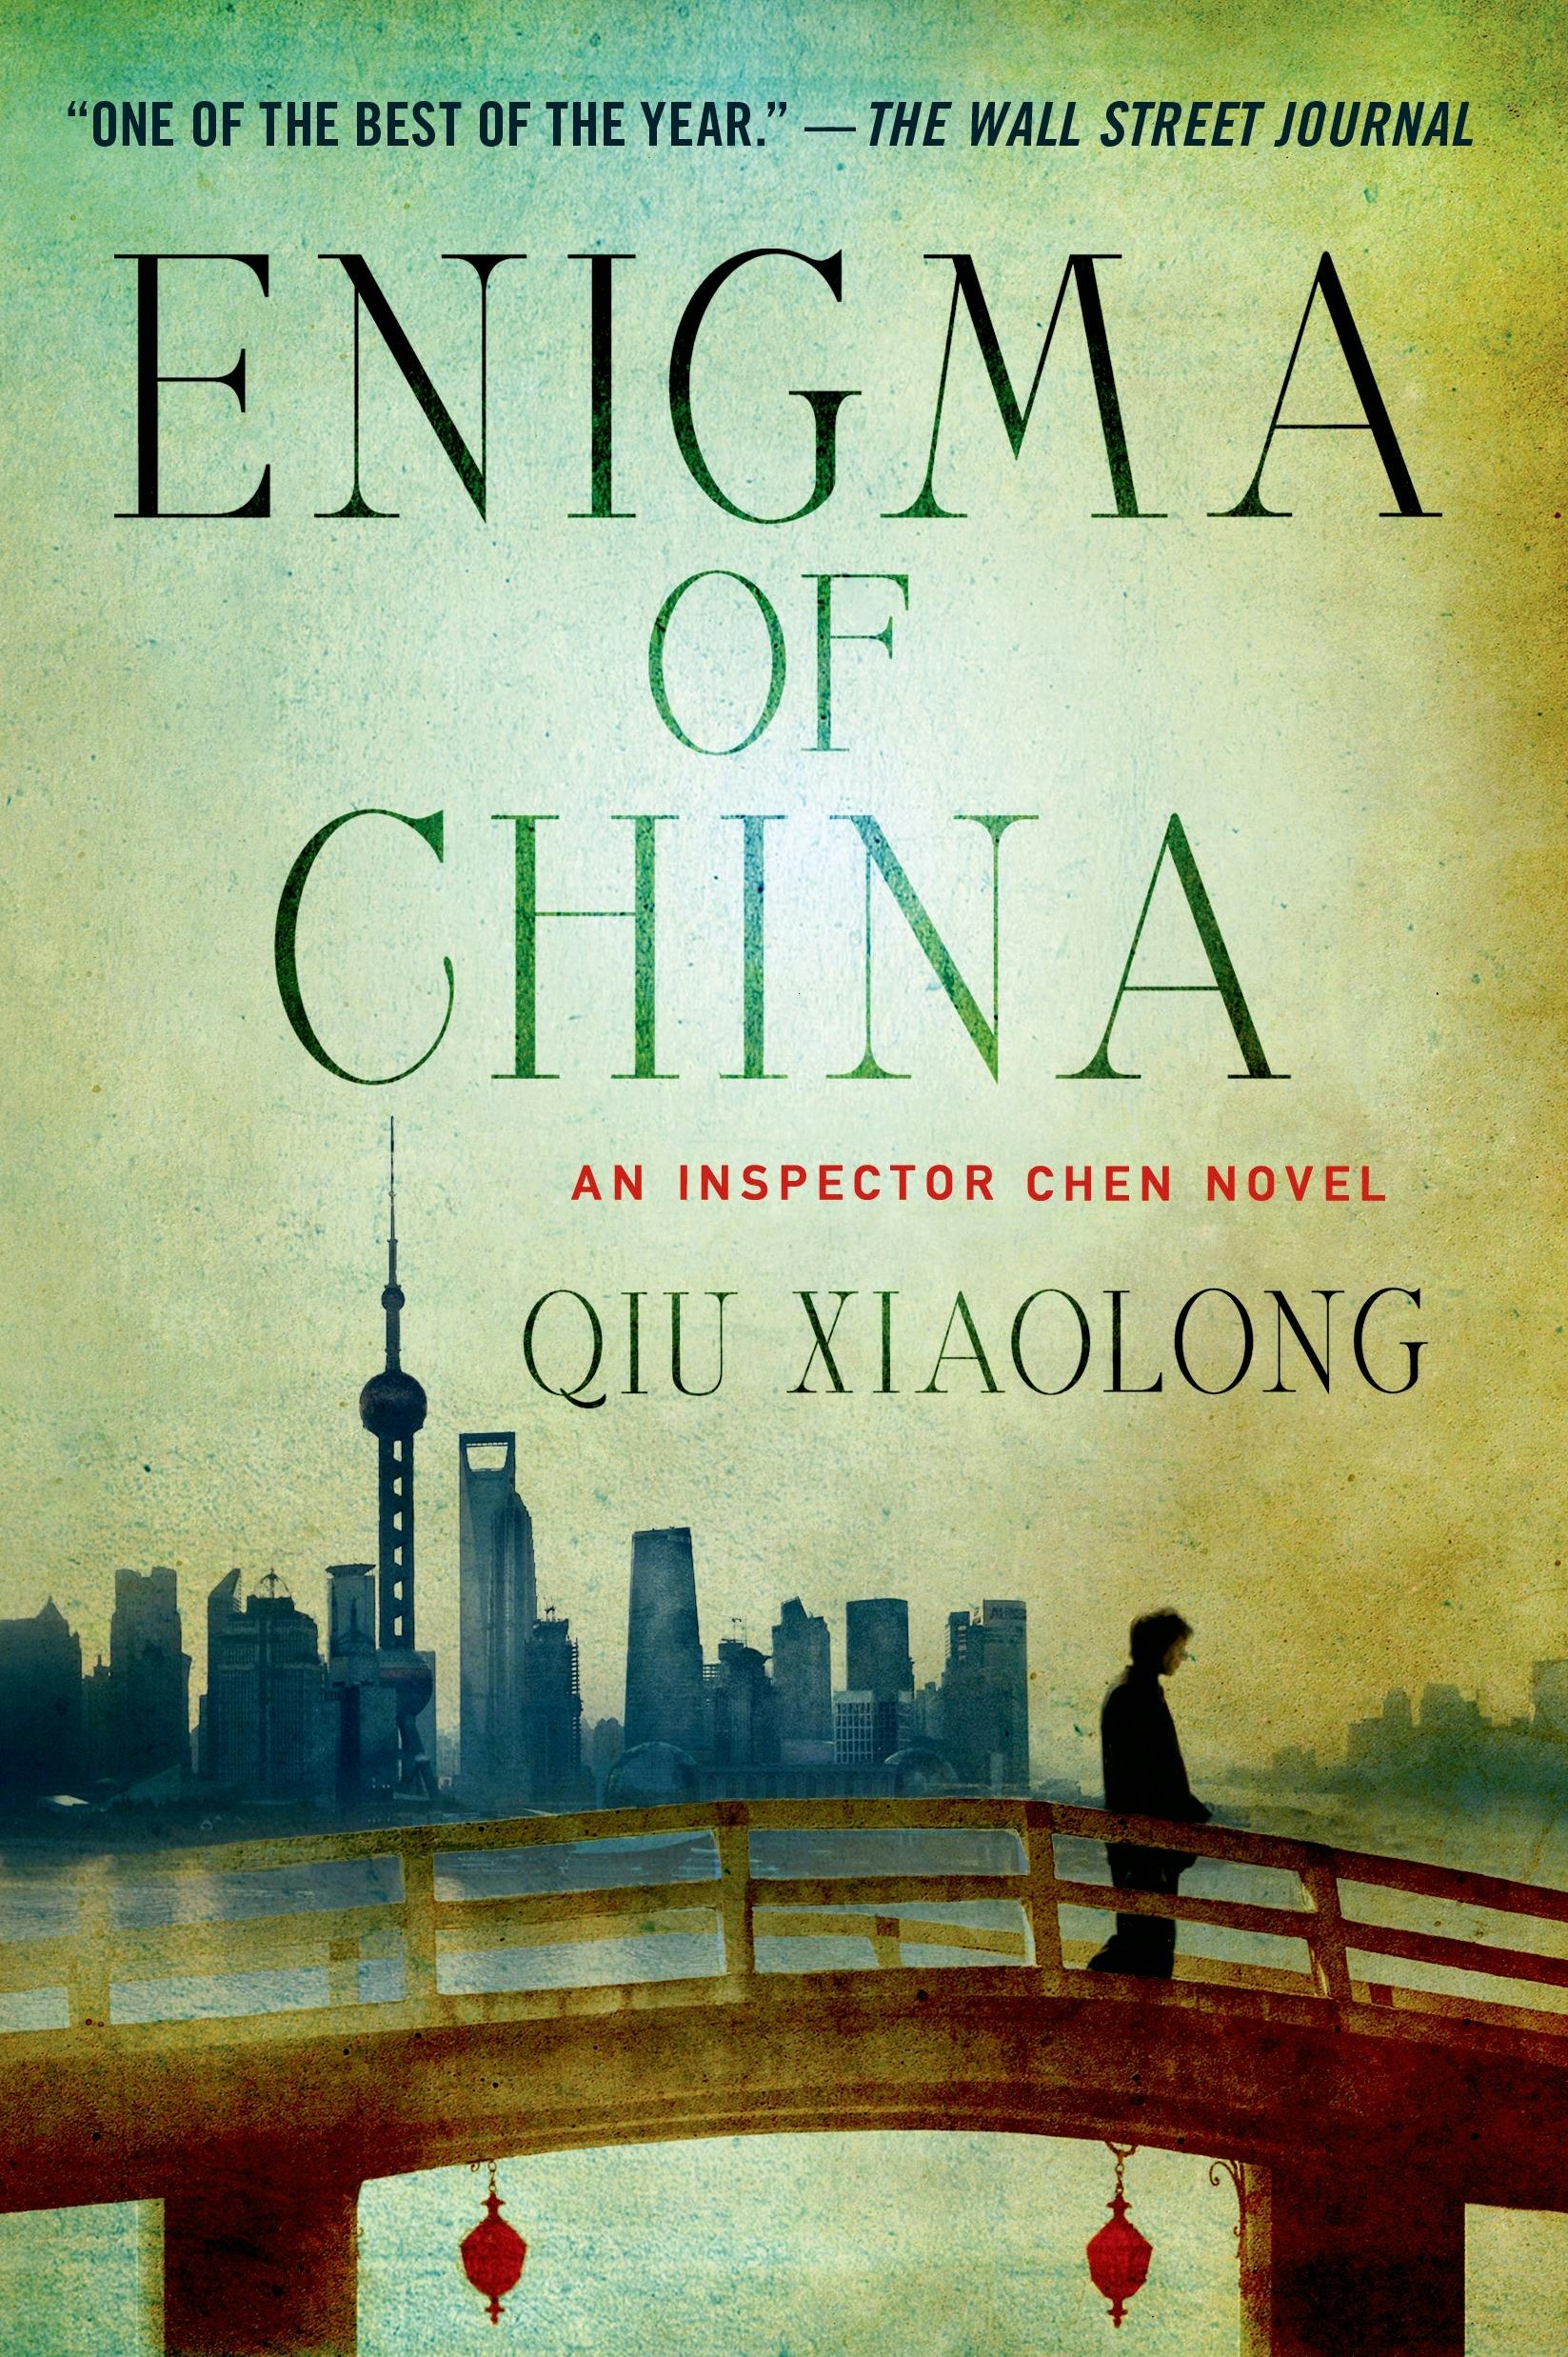 Image of Enigma of China